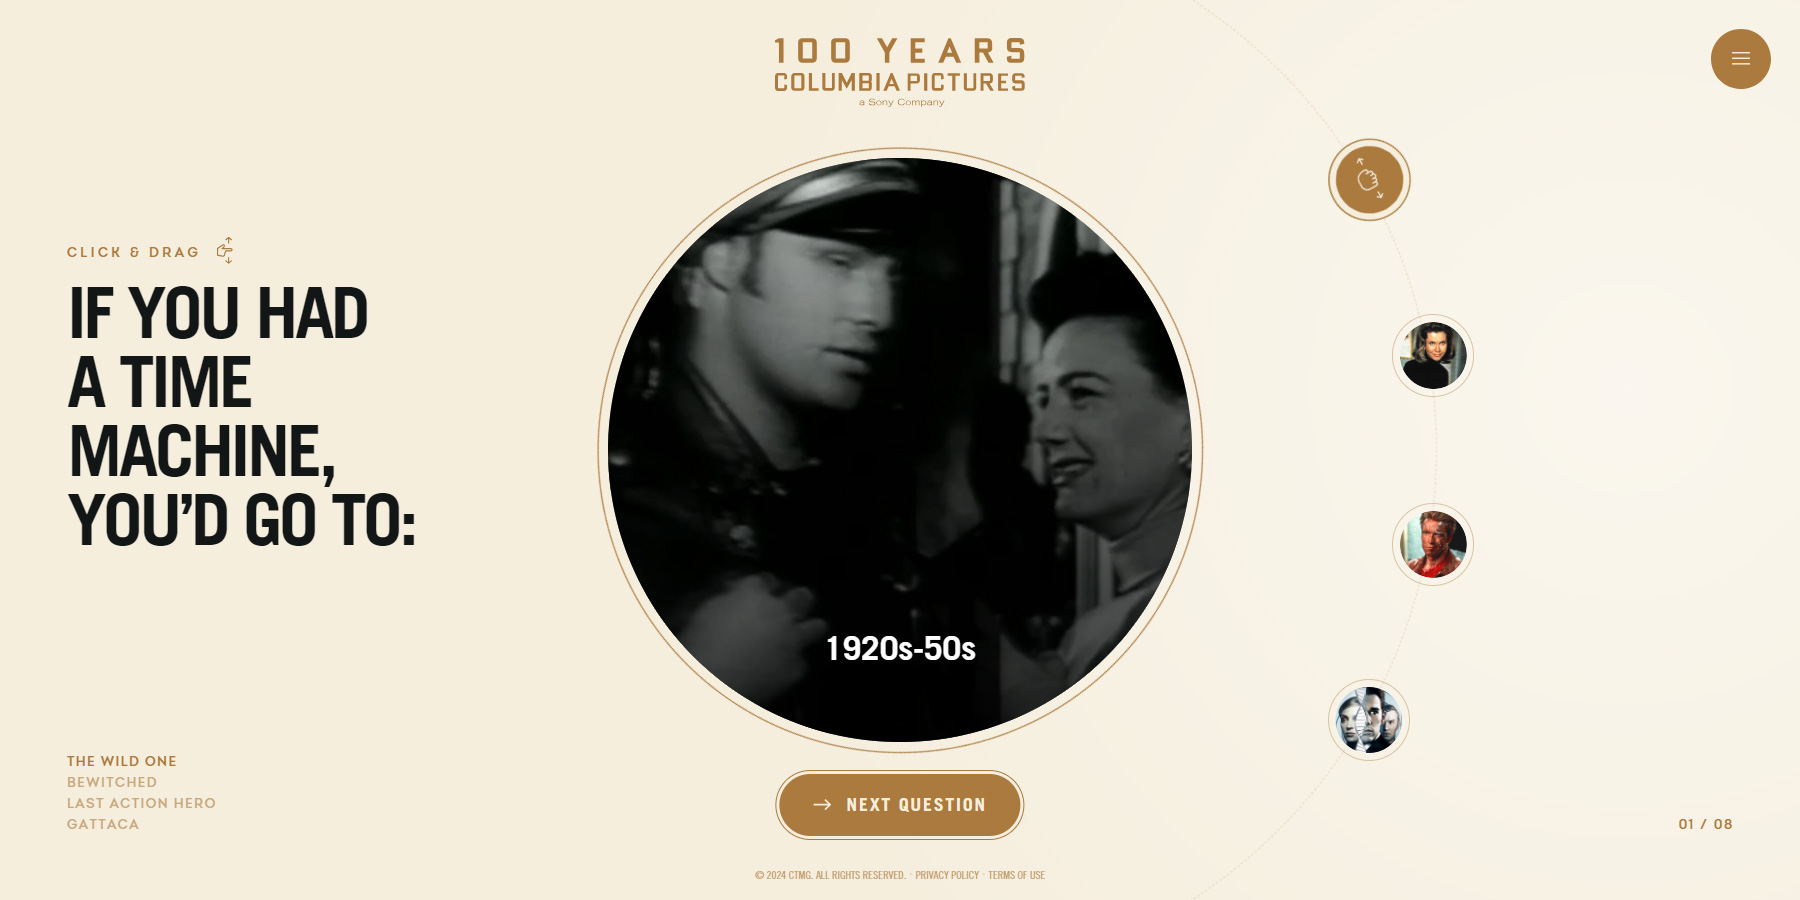 Sony Columbia 100 Year Anniversary - Website of the Day